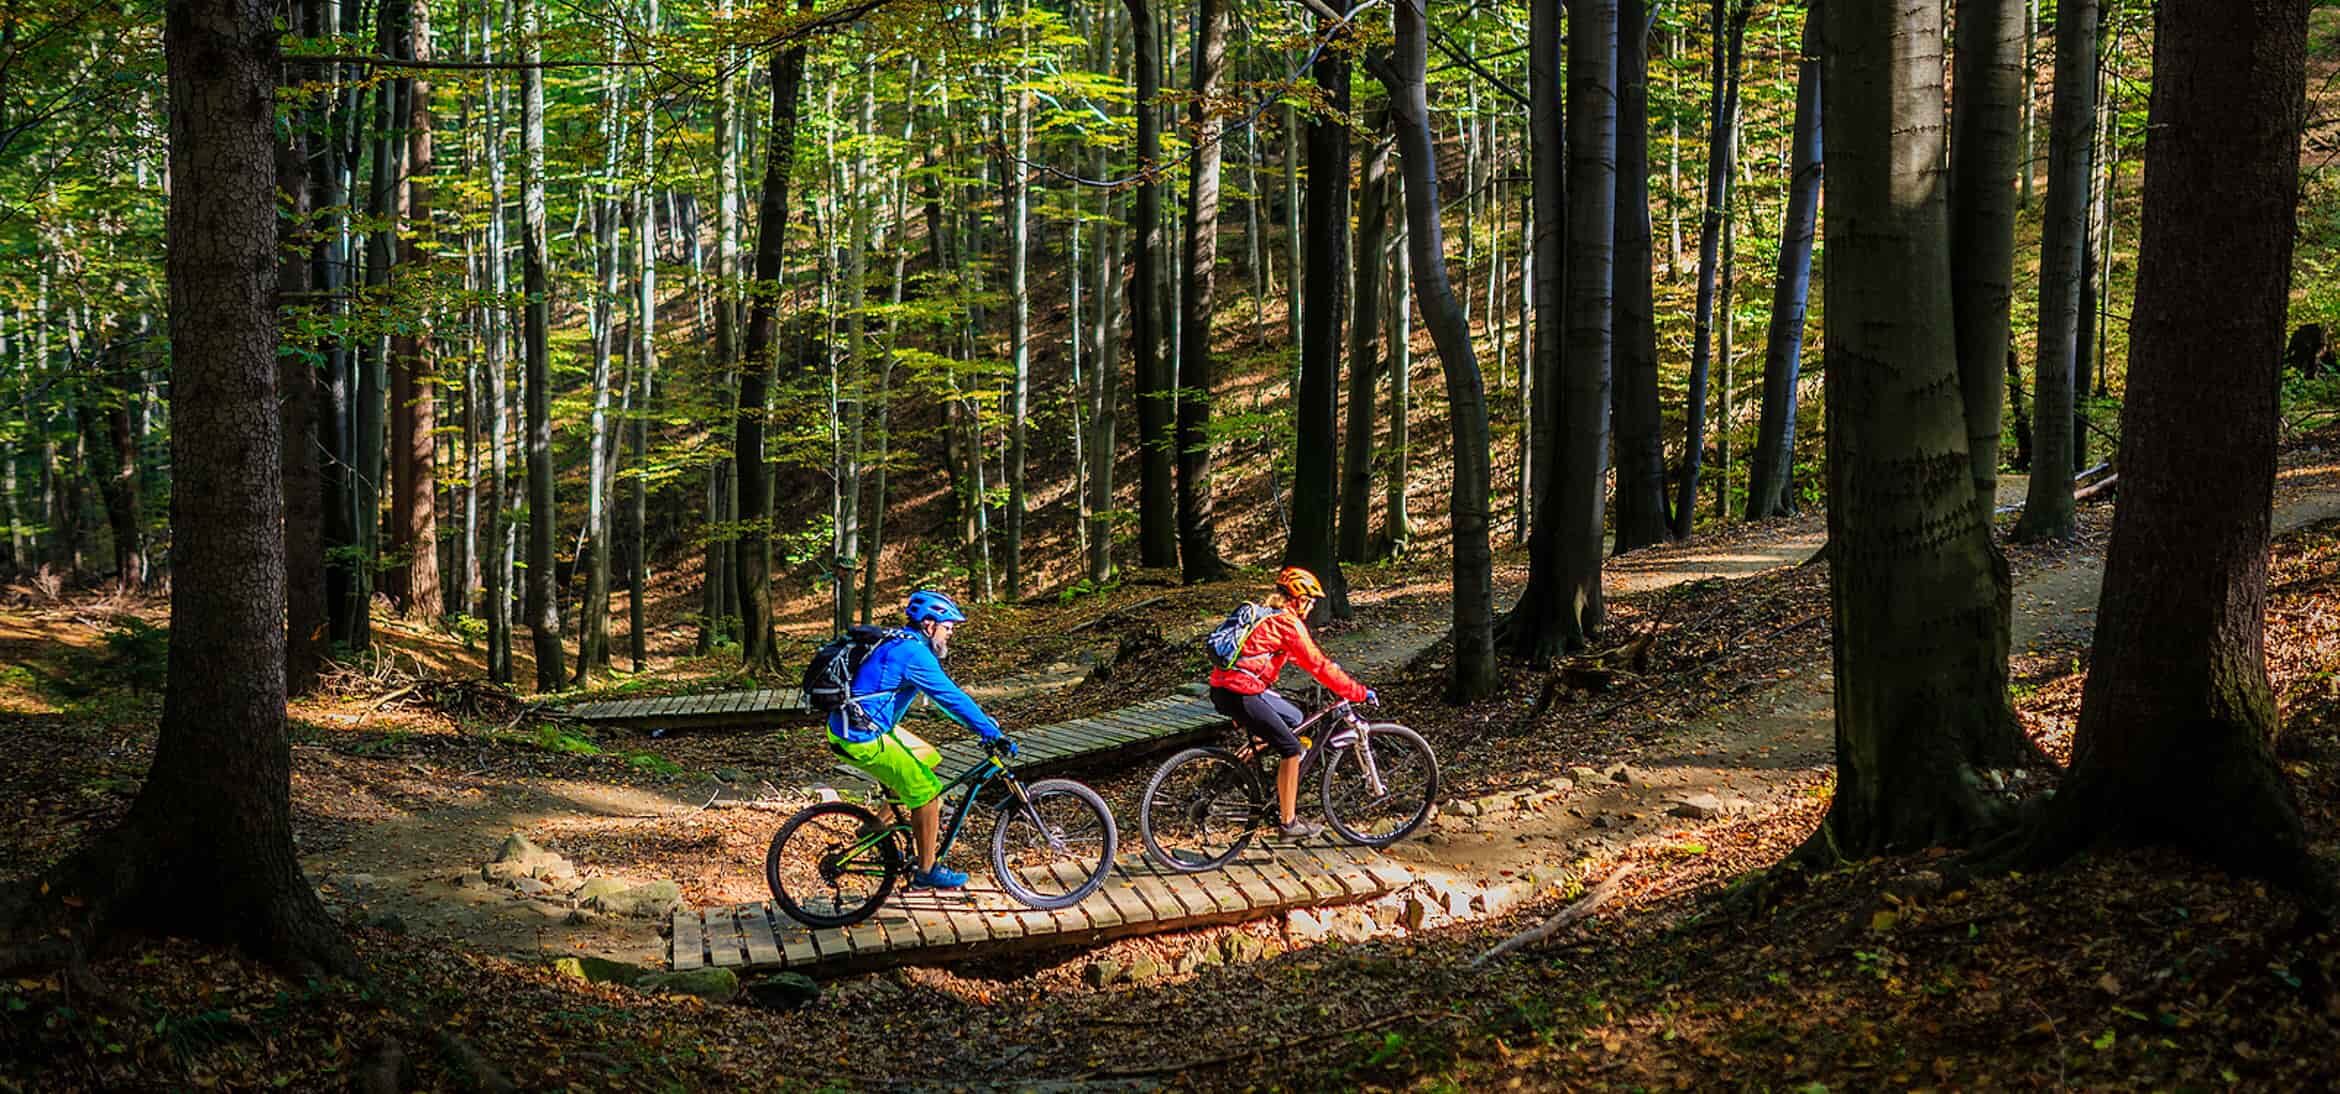 Couple biking in a forest